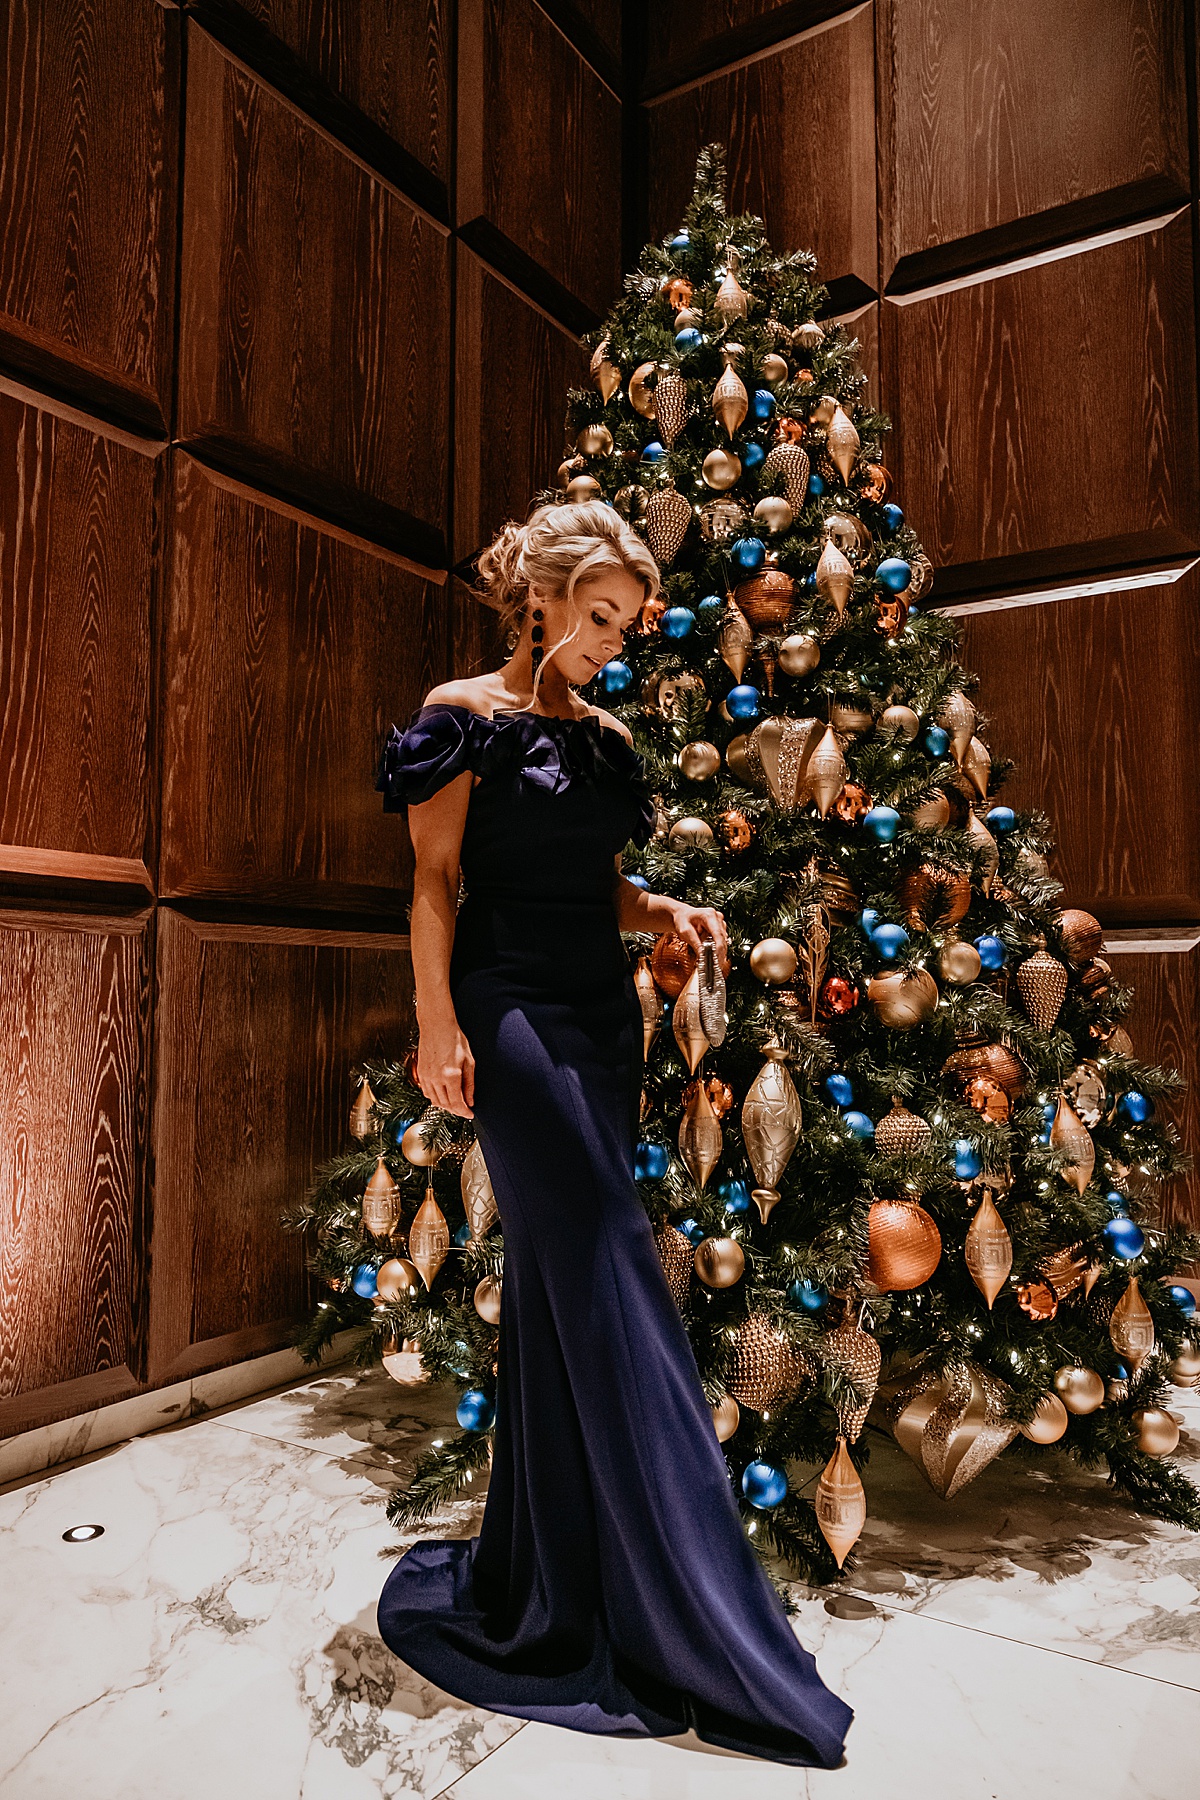 new years eve dress, new years eve dresses, NYE dress, NYE dress 2019, NYE 2019 outfit, bloomingdales, olivia rink outfit, holiday dreses 2019,